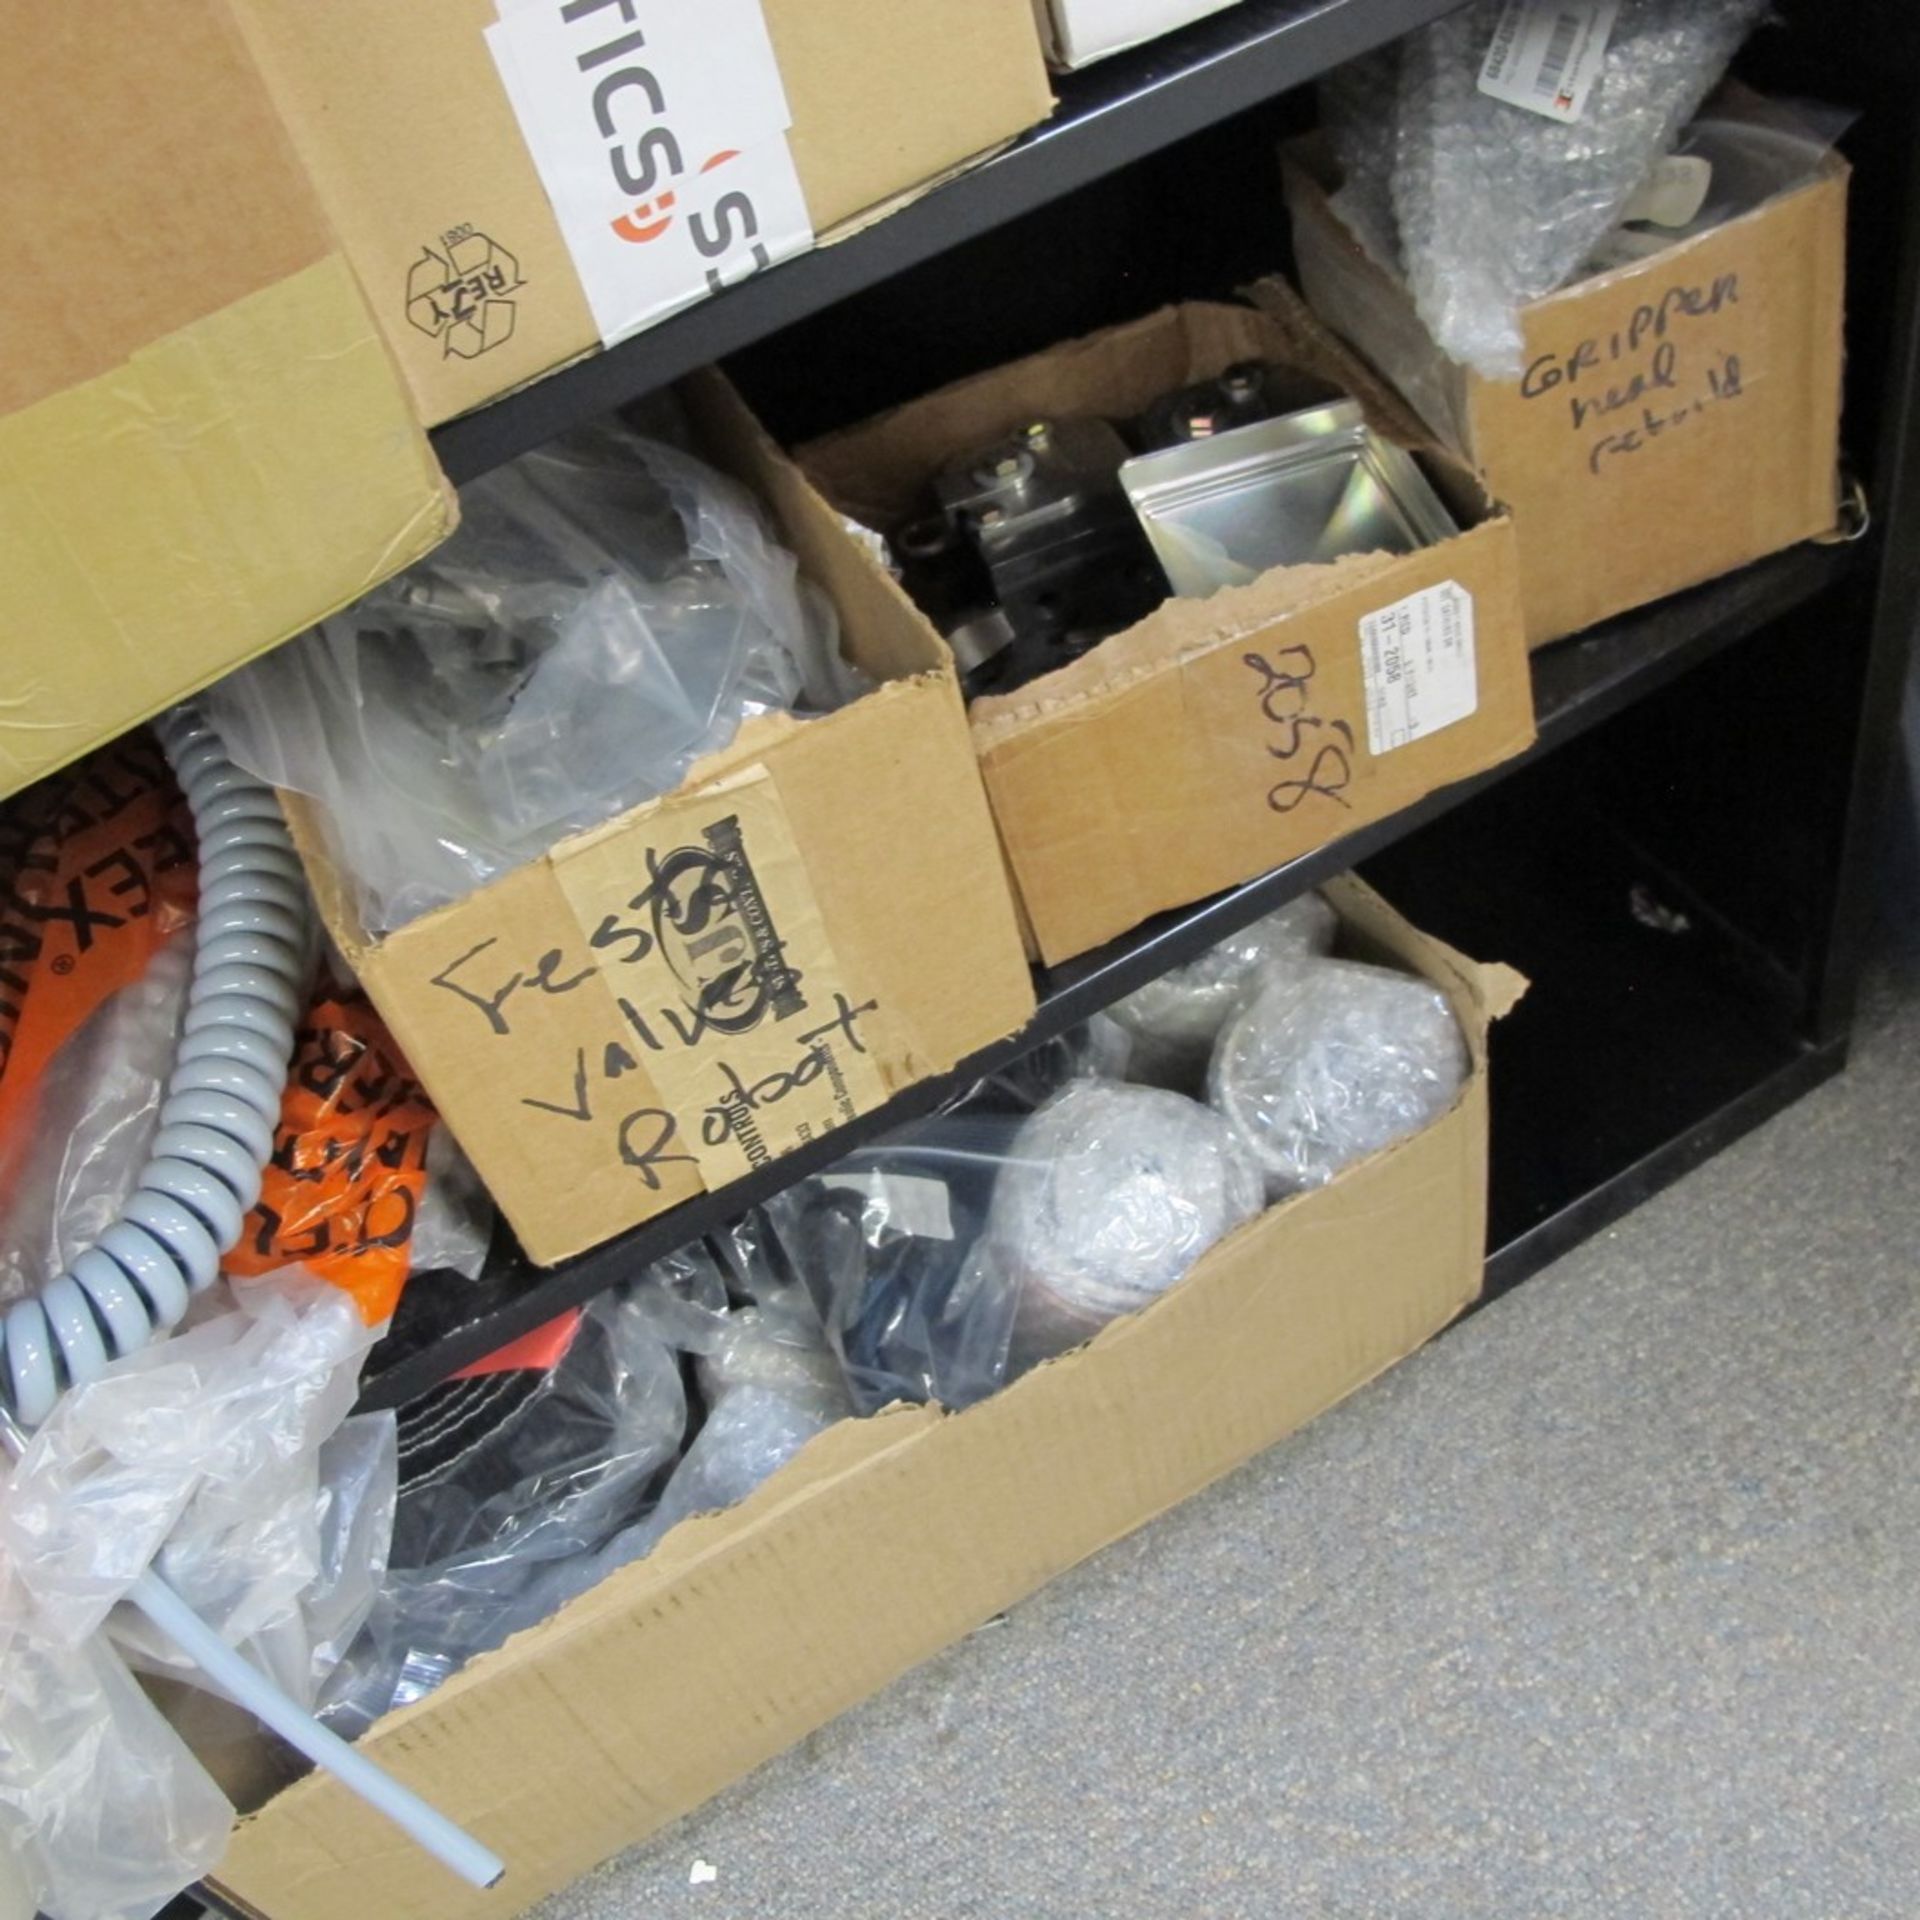 LOT OF (3) SHELVING UNITS/CABINETS W/ PARTS AS LABELLED AND SUPPLIES (2ND FLOOR NORTH OFFICES) - Image 5 of 5